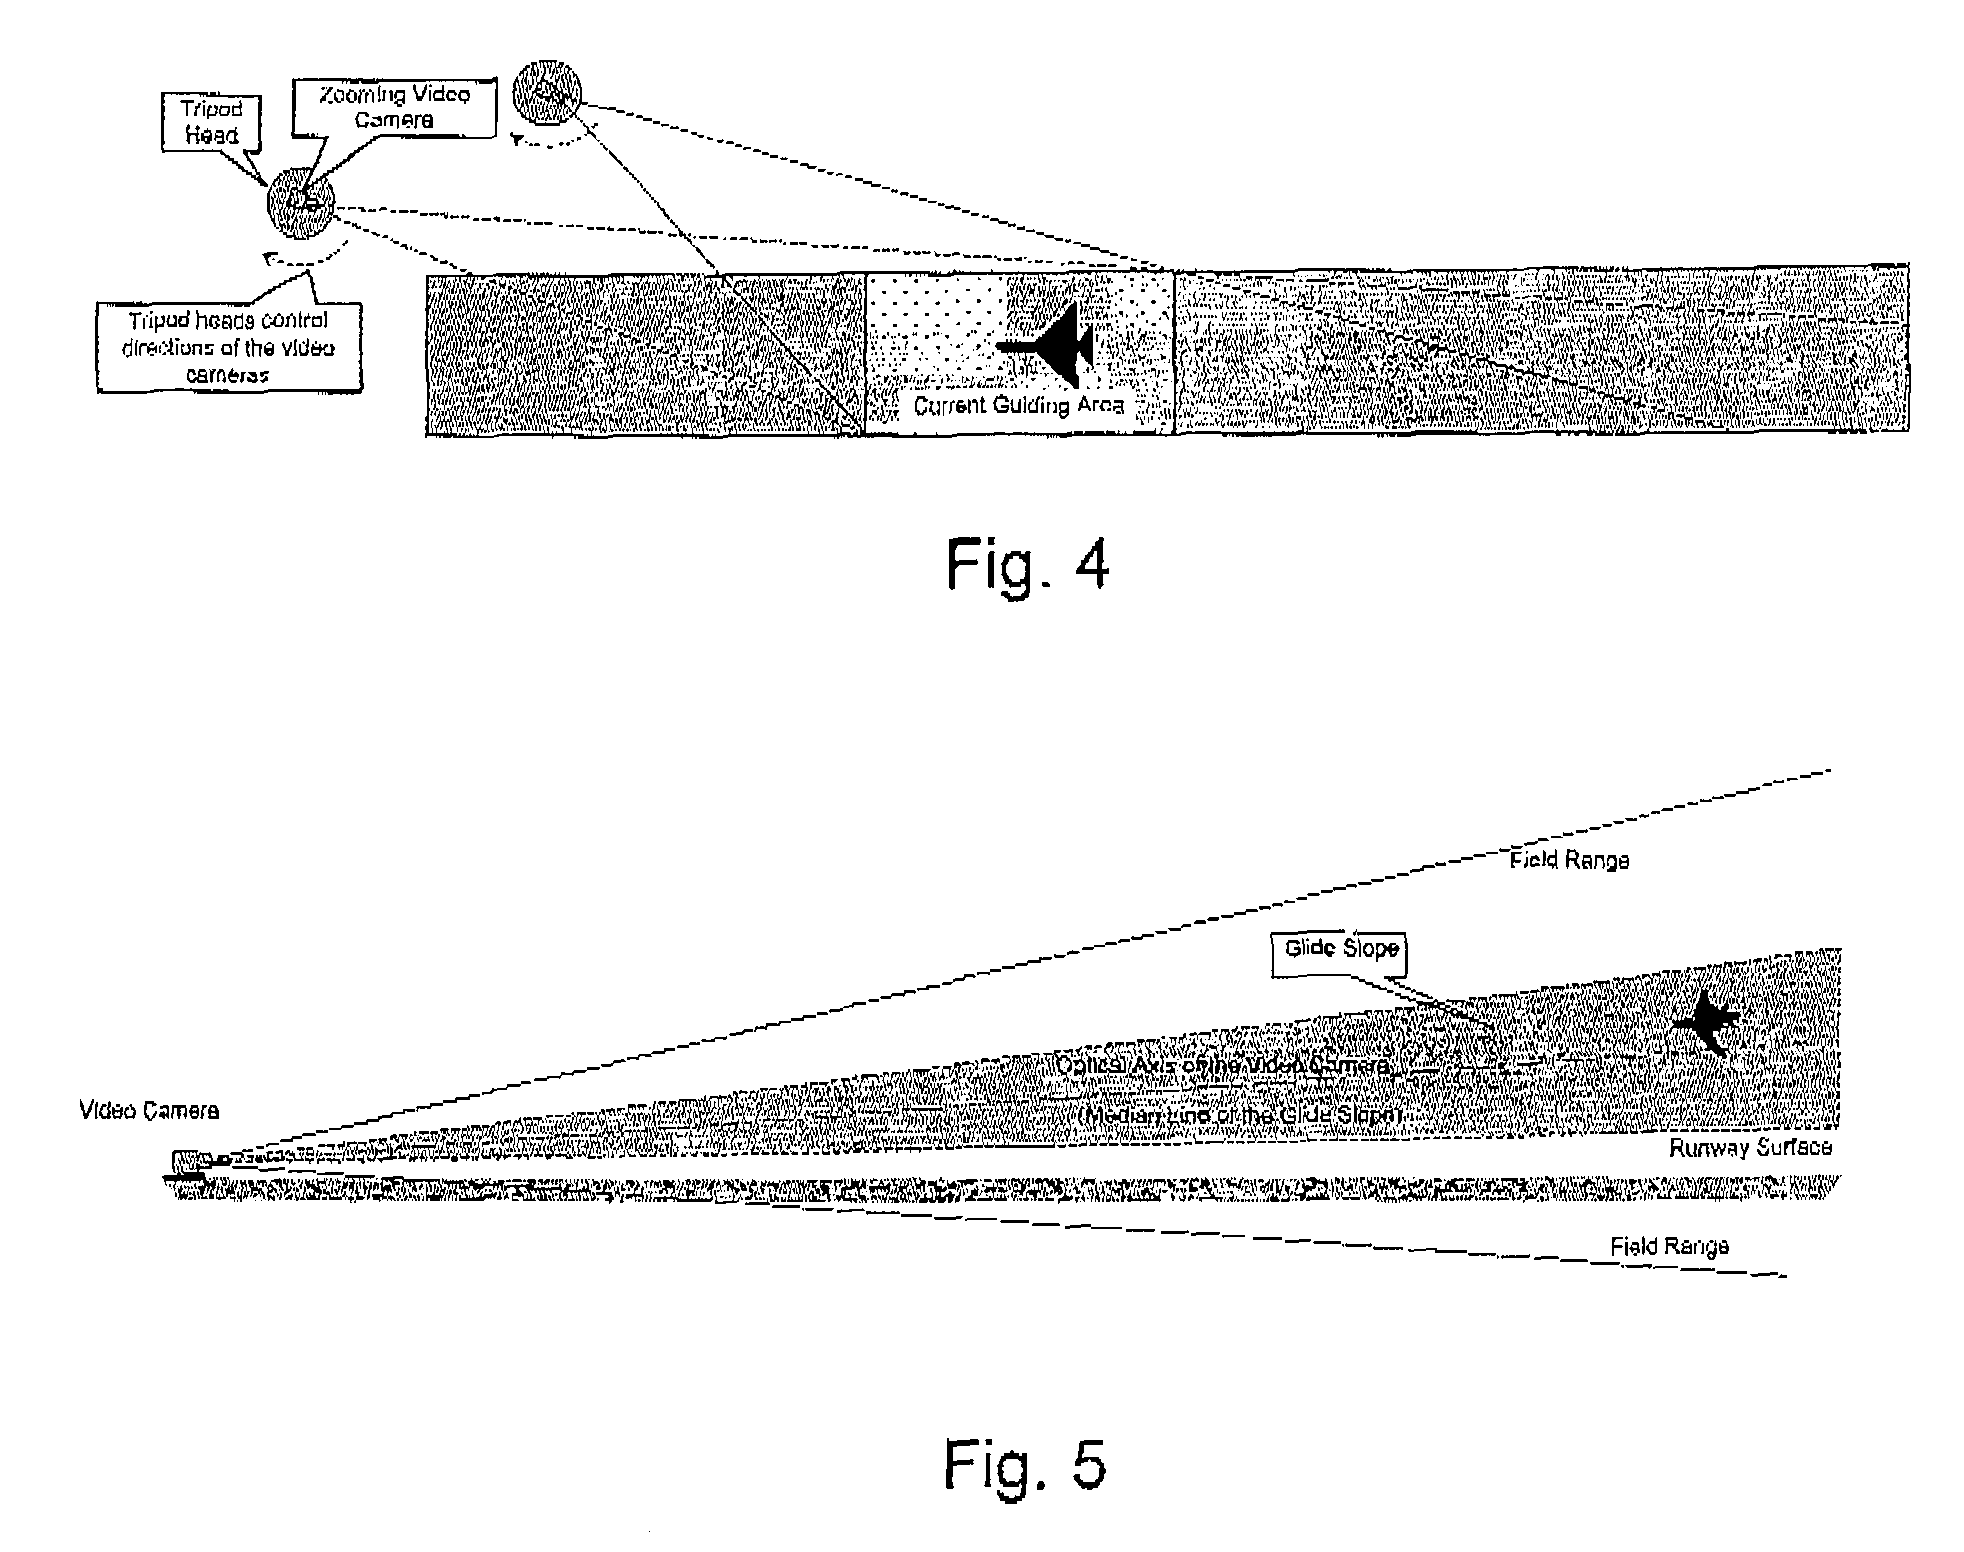 Ground-based camera surveying and guiding method for aircraft landing and unmanned aerial vehicle recovery